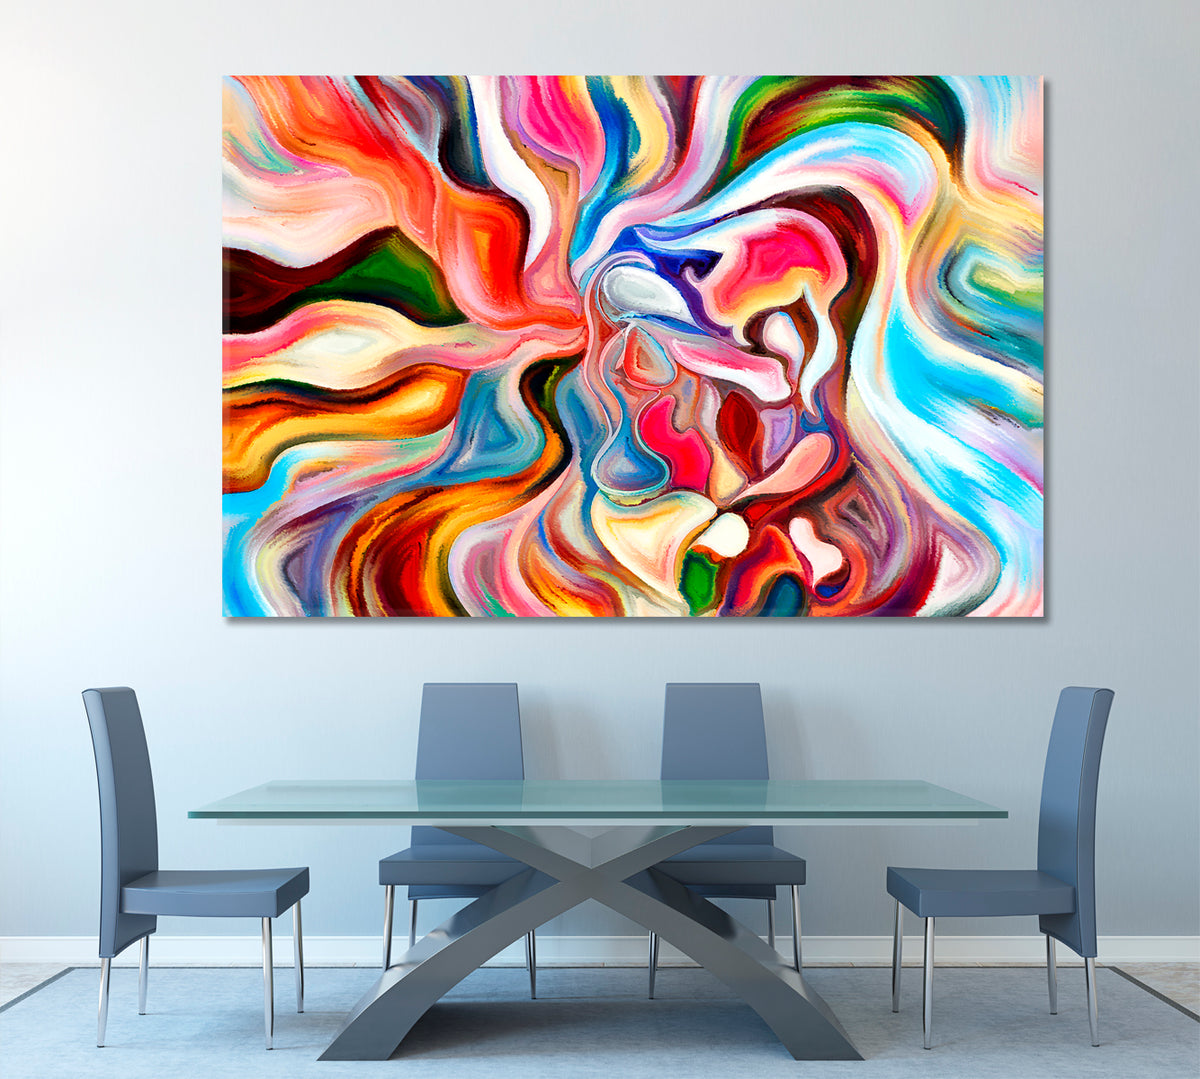 Borderlines of Colors Abstract Design, Colorful Human and Geometric Forms, Philosophy Creativity and Imagination Abstract Art Print Artesty 1 panel 24" x 16" 